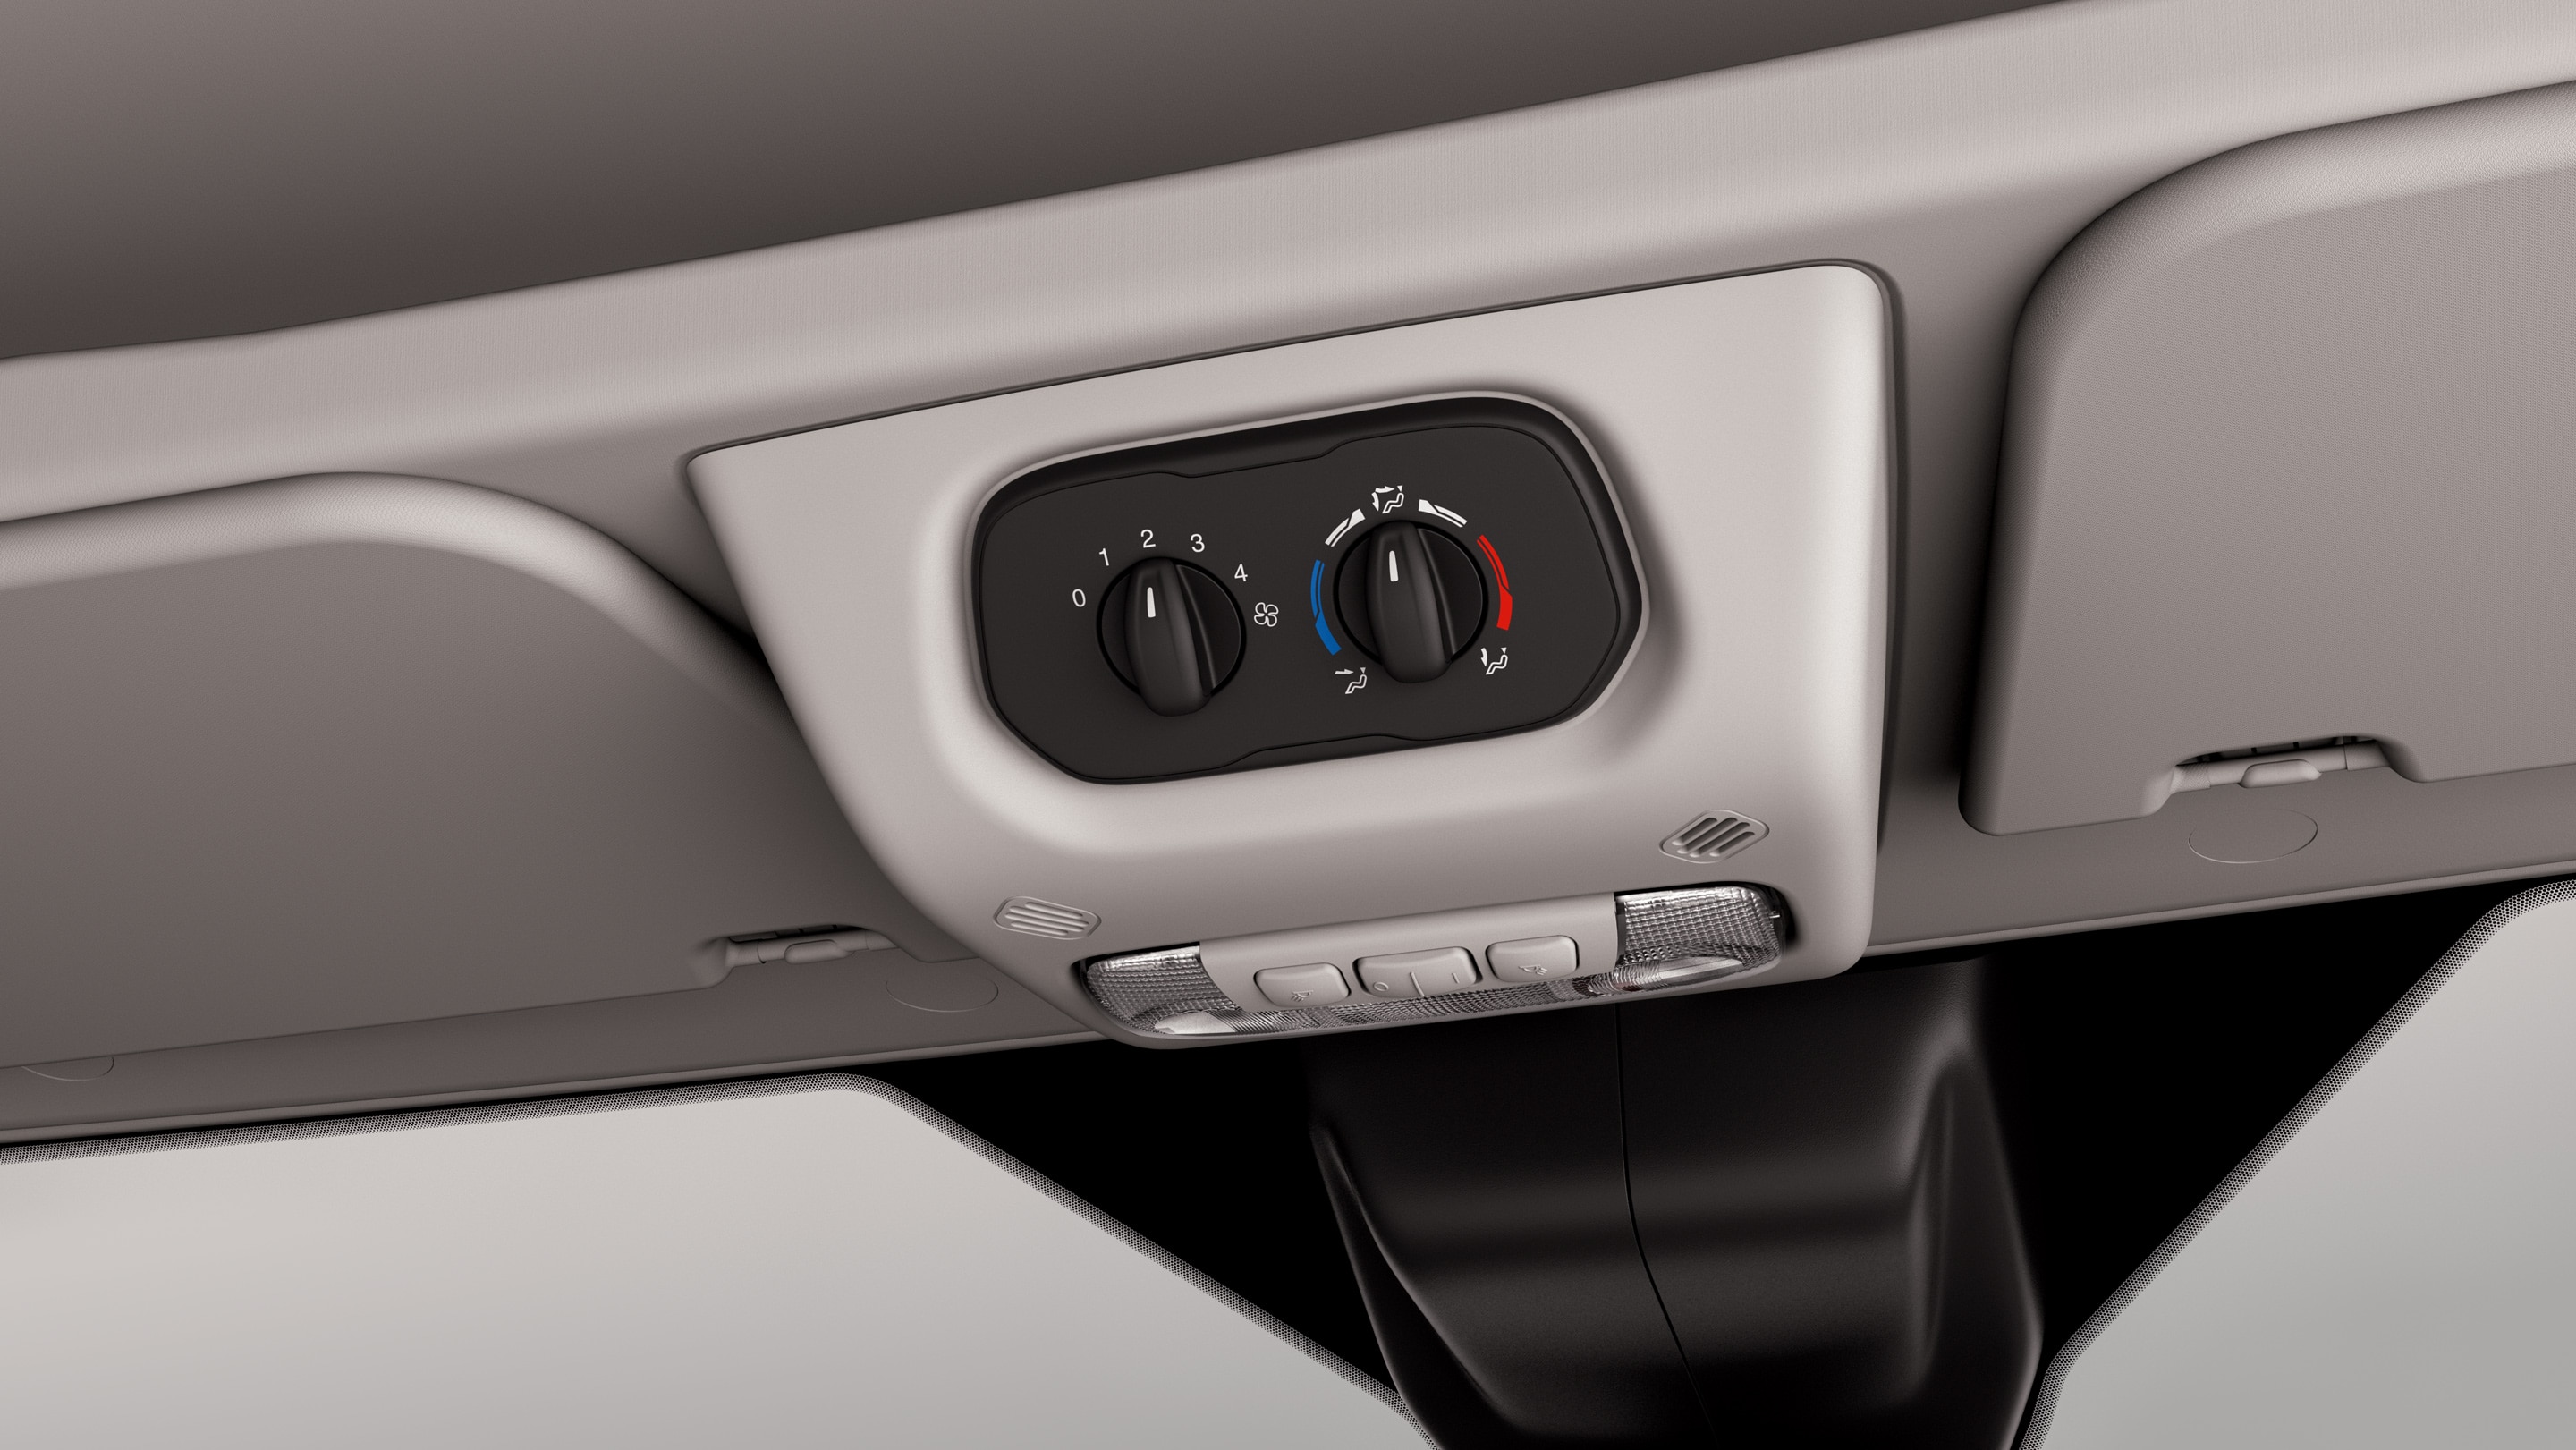 Ford Transit Minibus close up on aircon dials